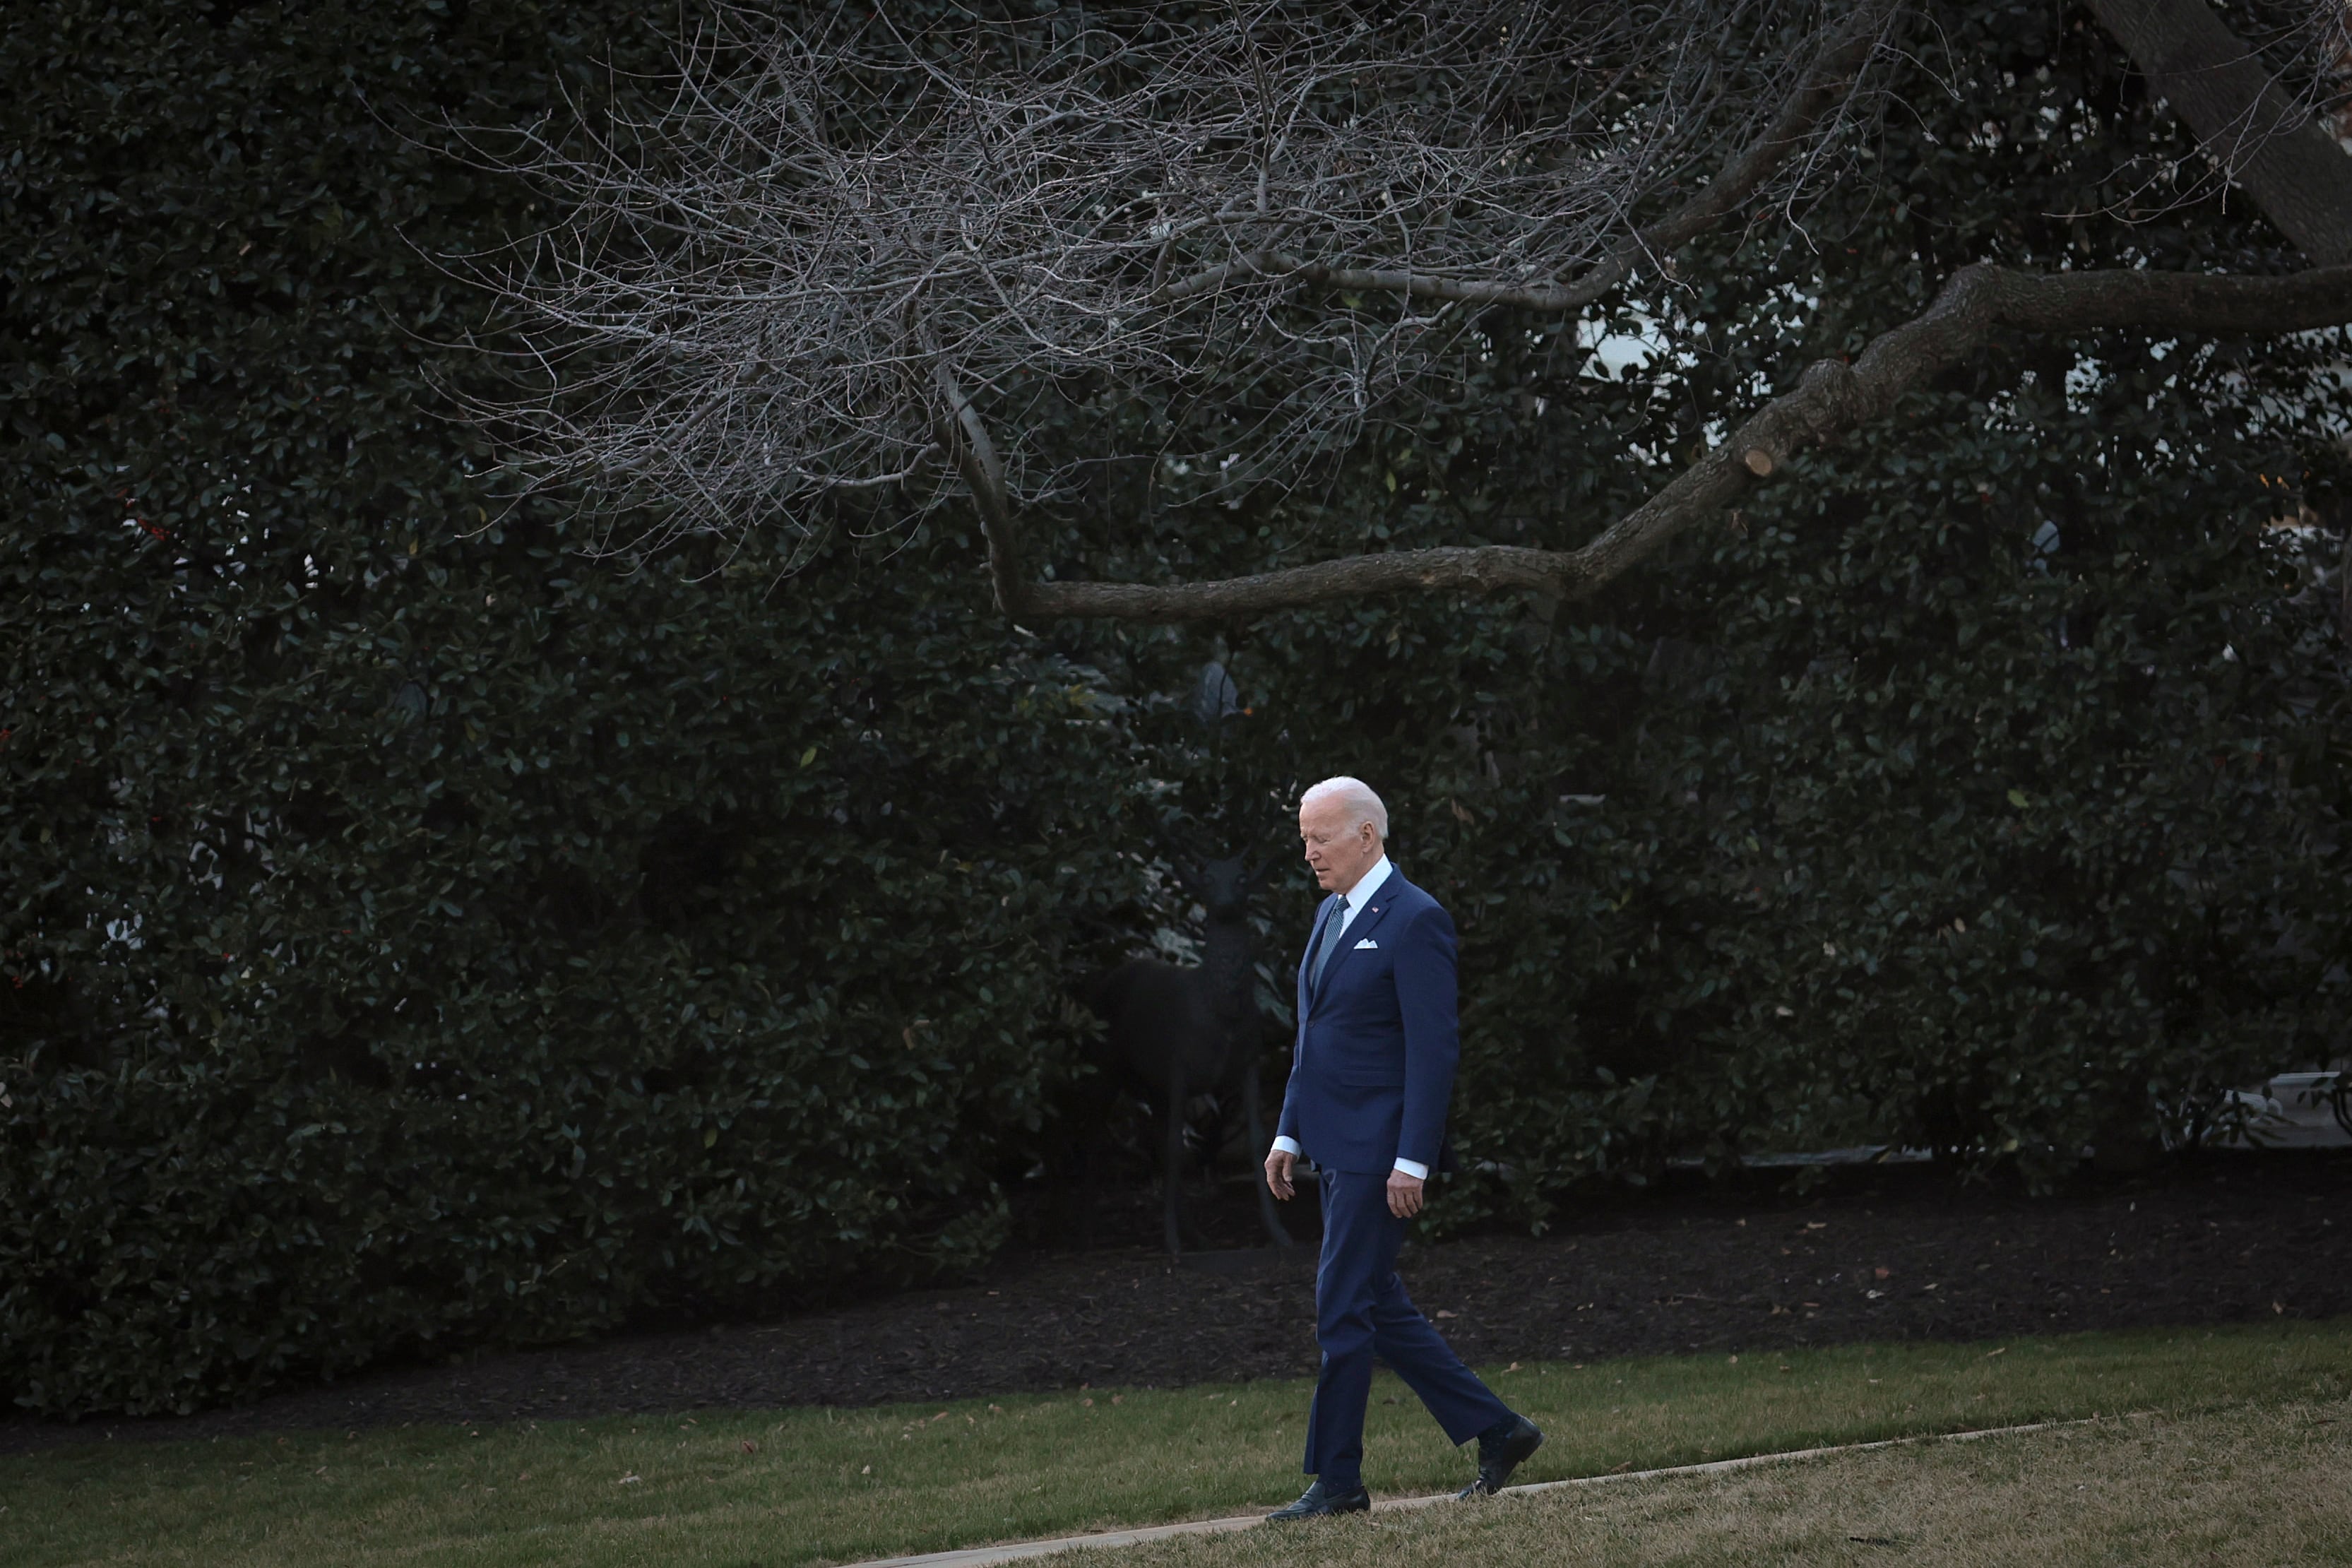 President Biden walks on a path outside of the White House, a tree branch hanging over his head.